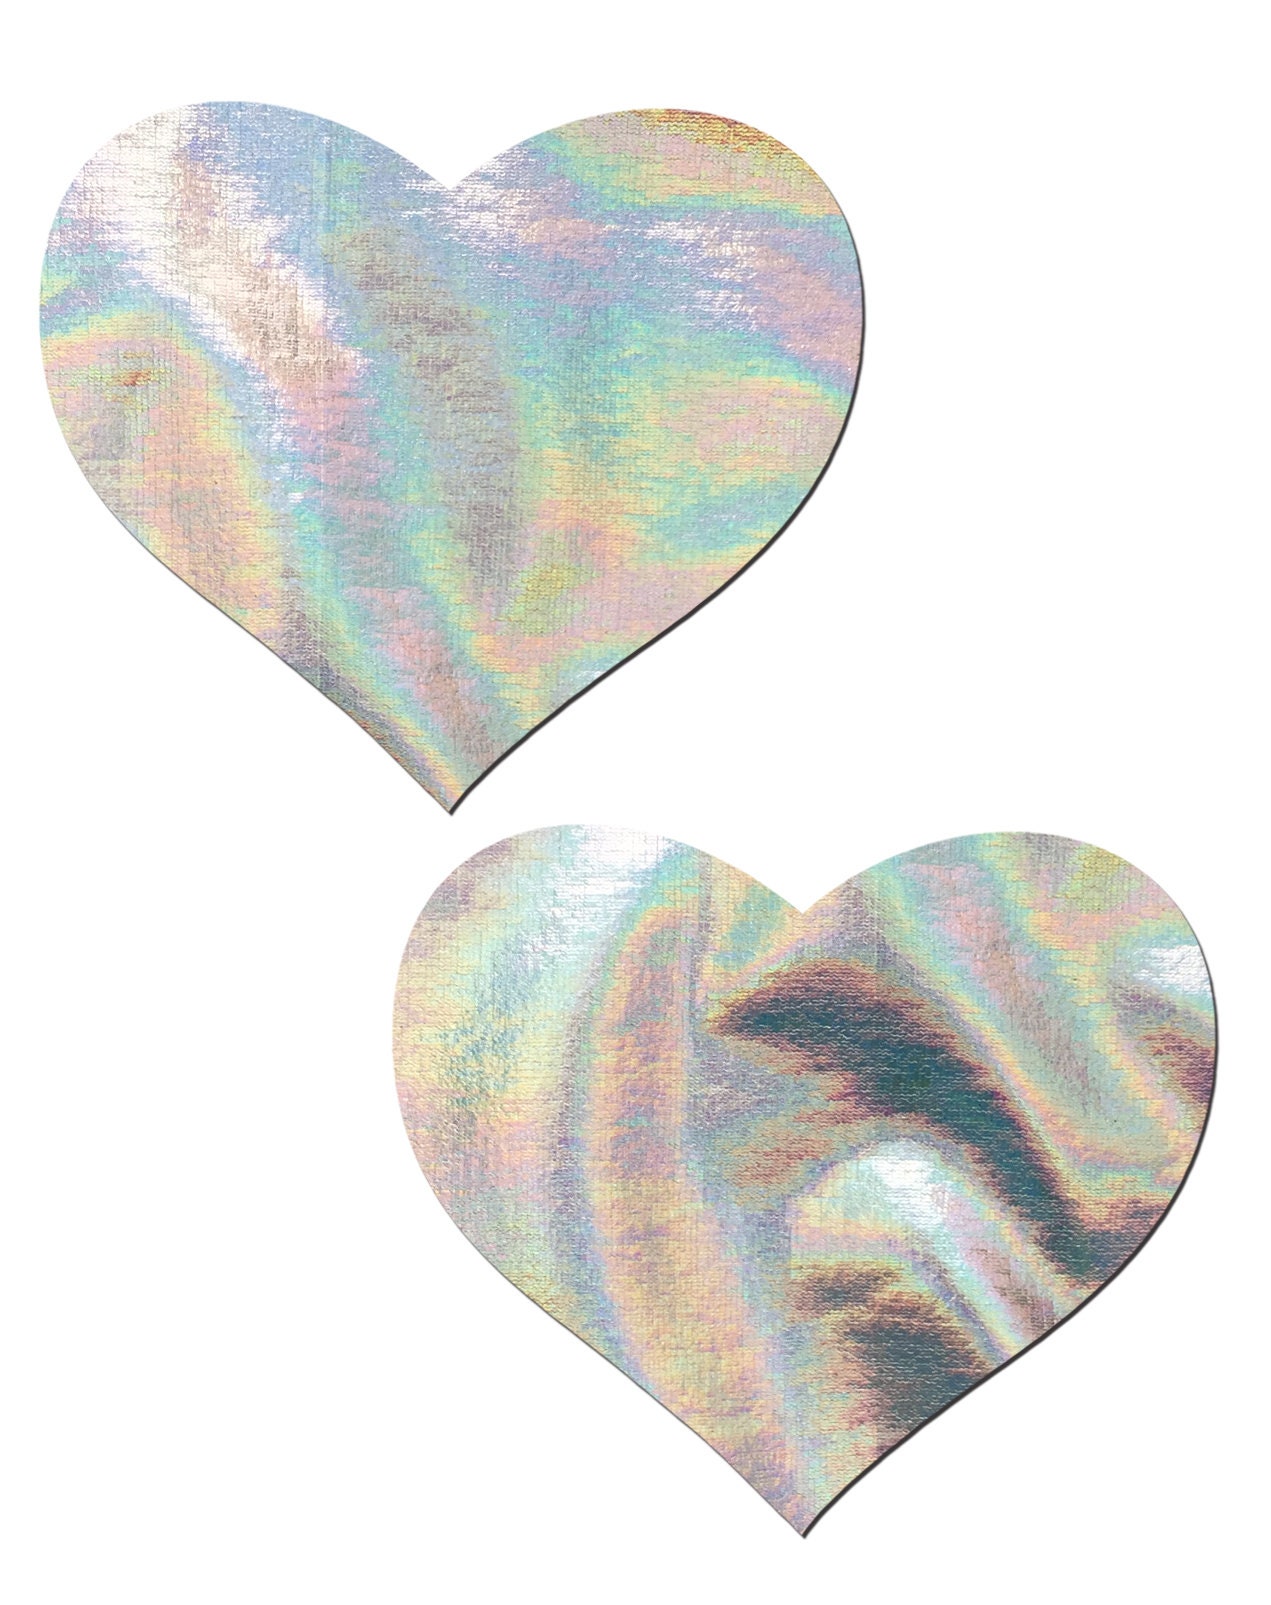 Red Heart Nipple Tassels - Holographic